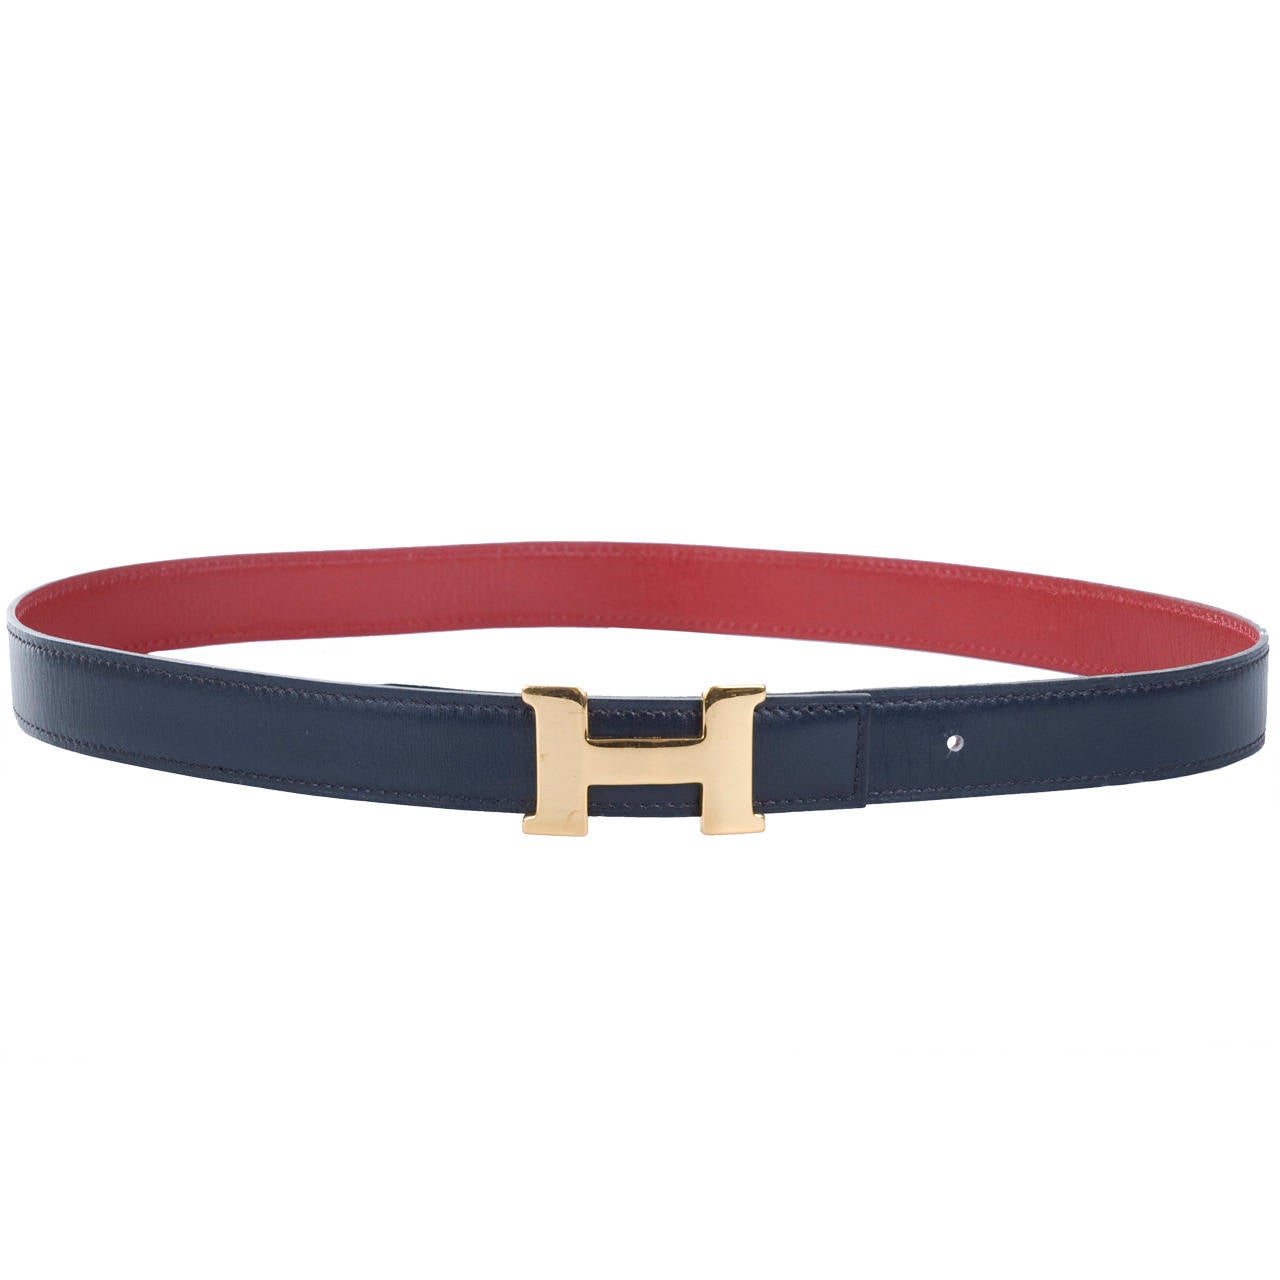 1990 Small Hermes Belt in Black/Red For Sale